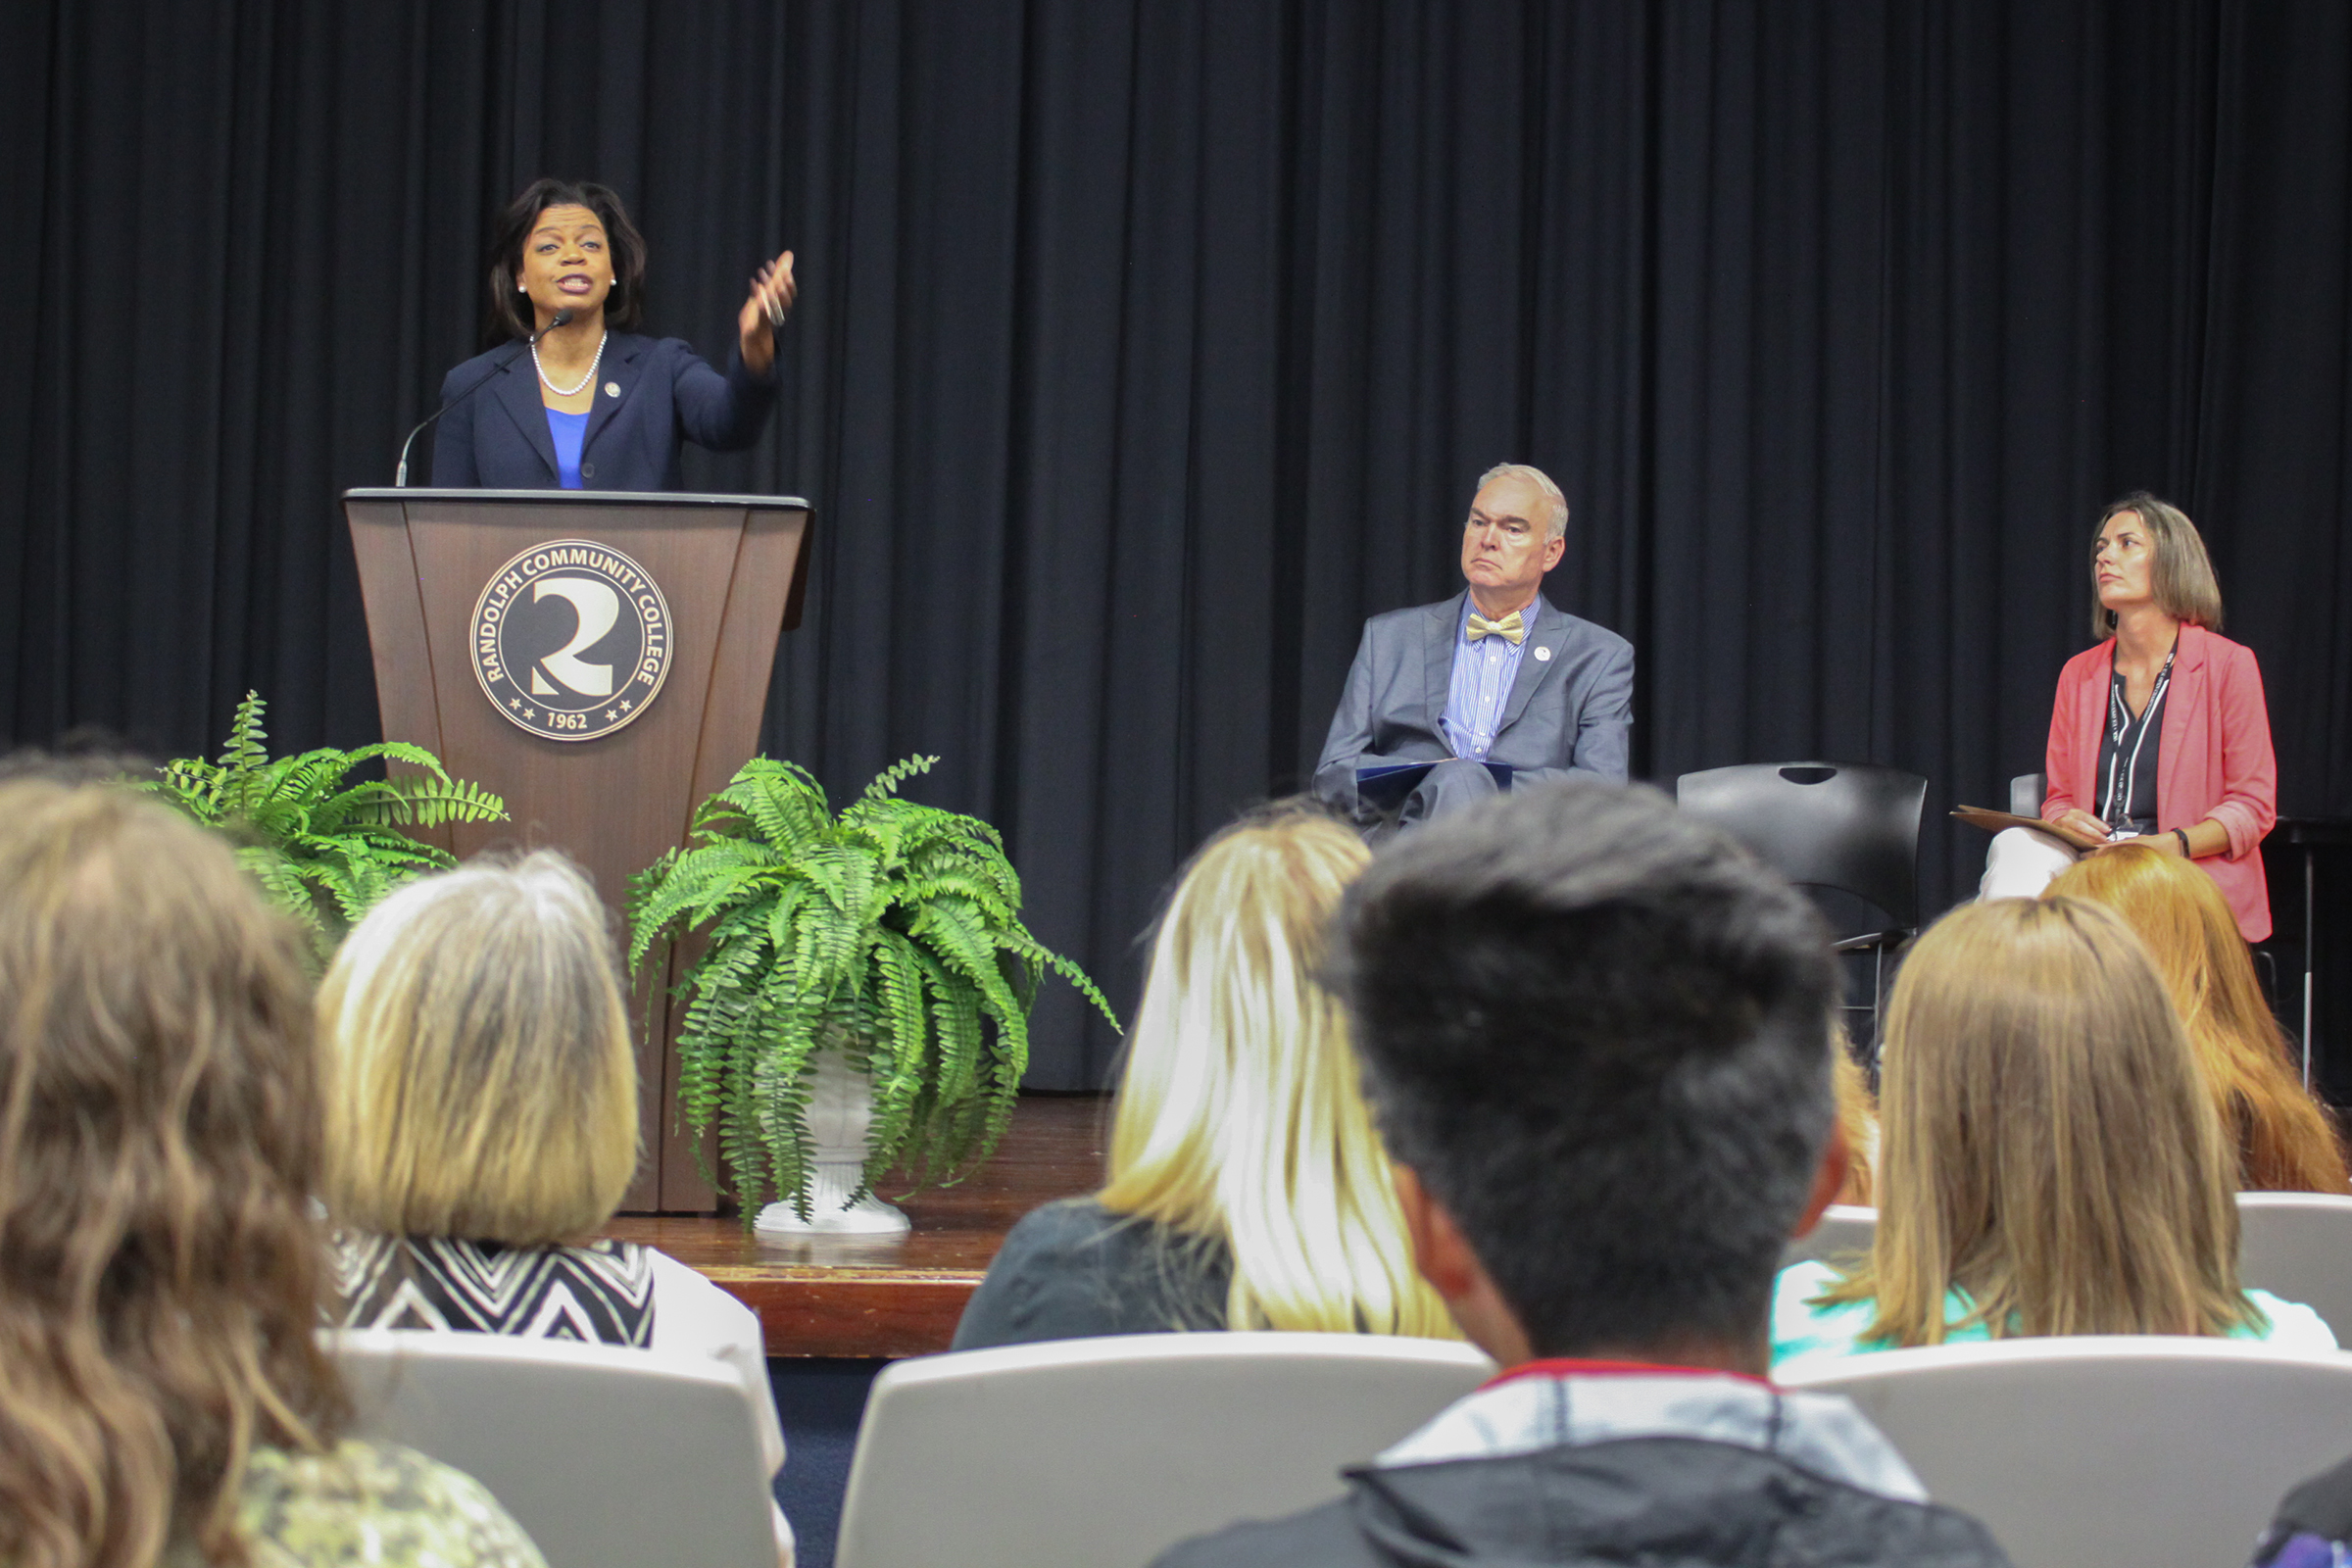 Cheri Beasley, Chief Justice of the Supreme Court of North Carolina, speaks at the R. Alton Cox Learning Resources Center auditorium Tuesday, Sept. 3.